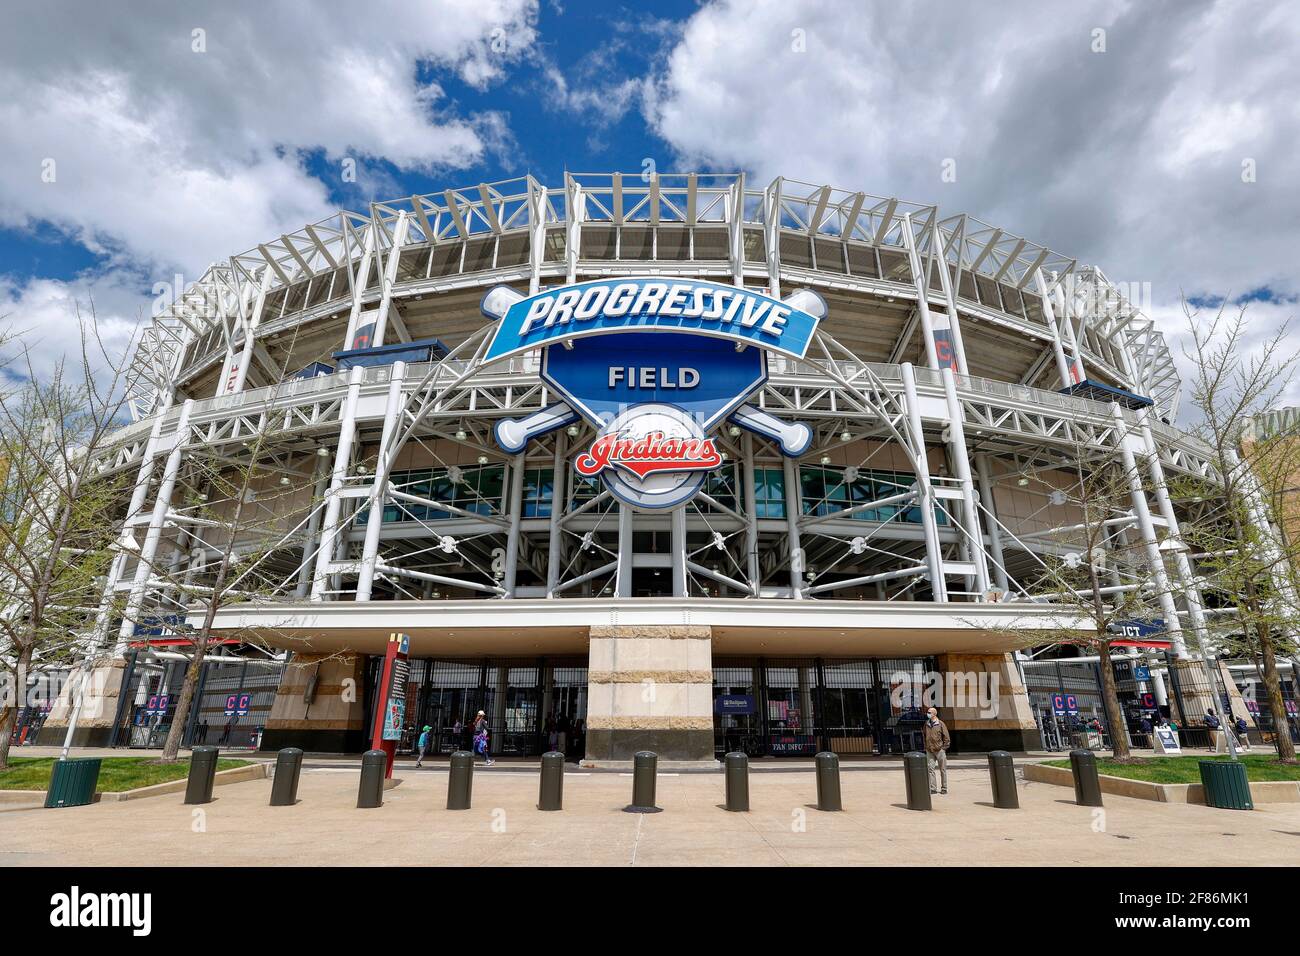 CLEVELAND, OH - APRIL 11: General exterior view of the ballpark entrance prior to a game between the Detroit Tigers and Cleveland Indians at Progressi Stock Photo